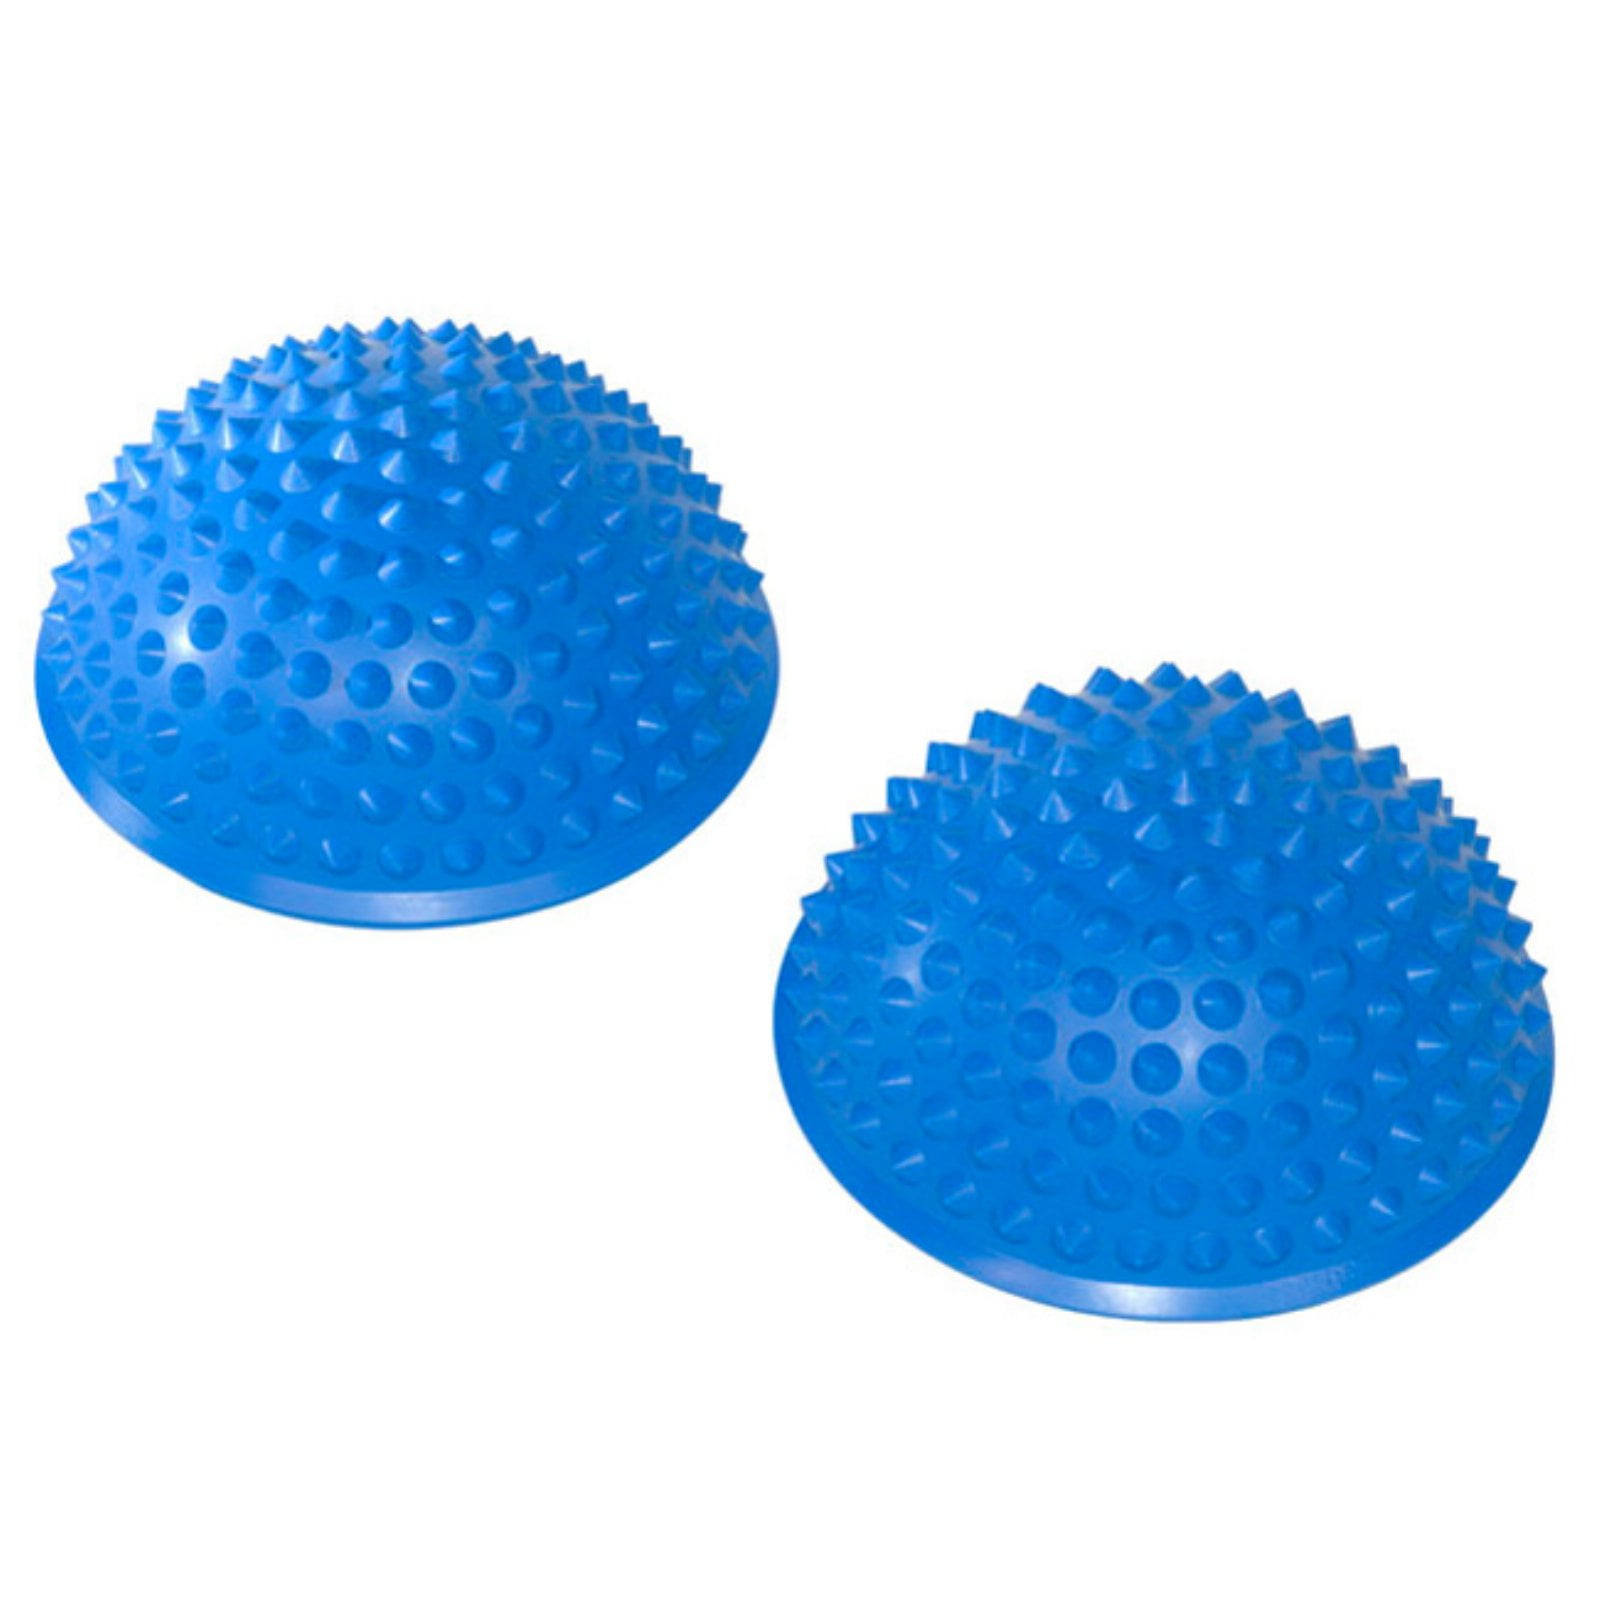 Balance Stepping Stones for Kids Soft Safe Children's Physical Training Toy Color : Purple, Size : 2PCS Balance Pods- Hedgehog Style Half Dome Stepping Stones 1Pcs